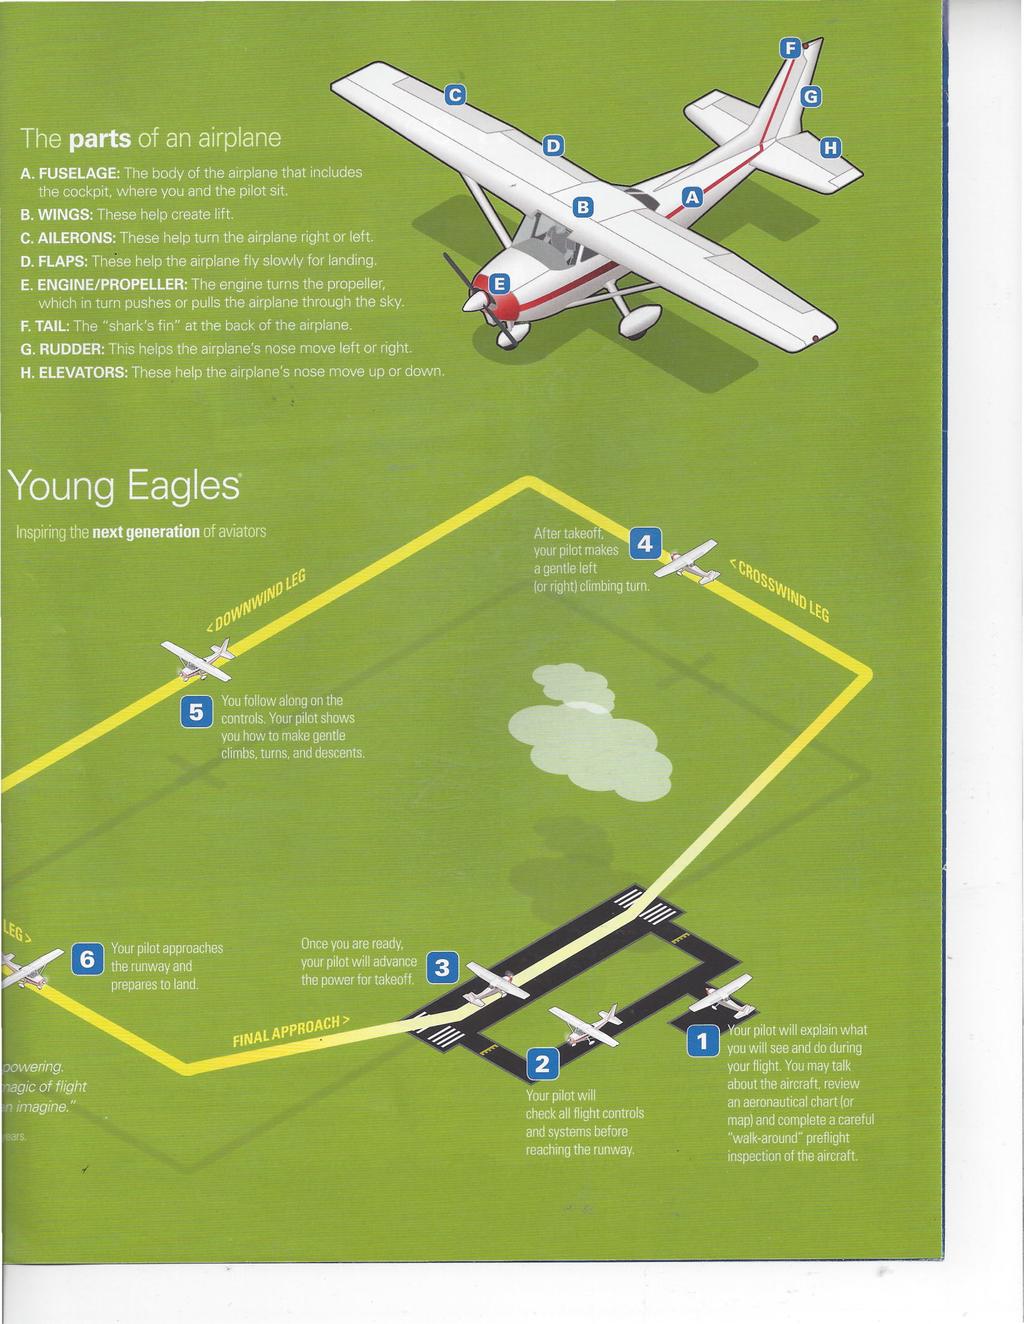 - C. AILERONS: ifhese help turn the airplane right or left back of the alrrlane.